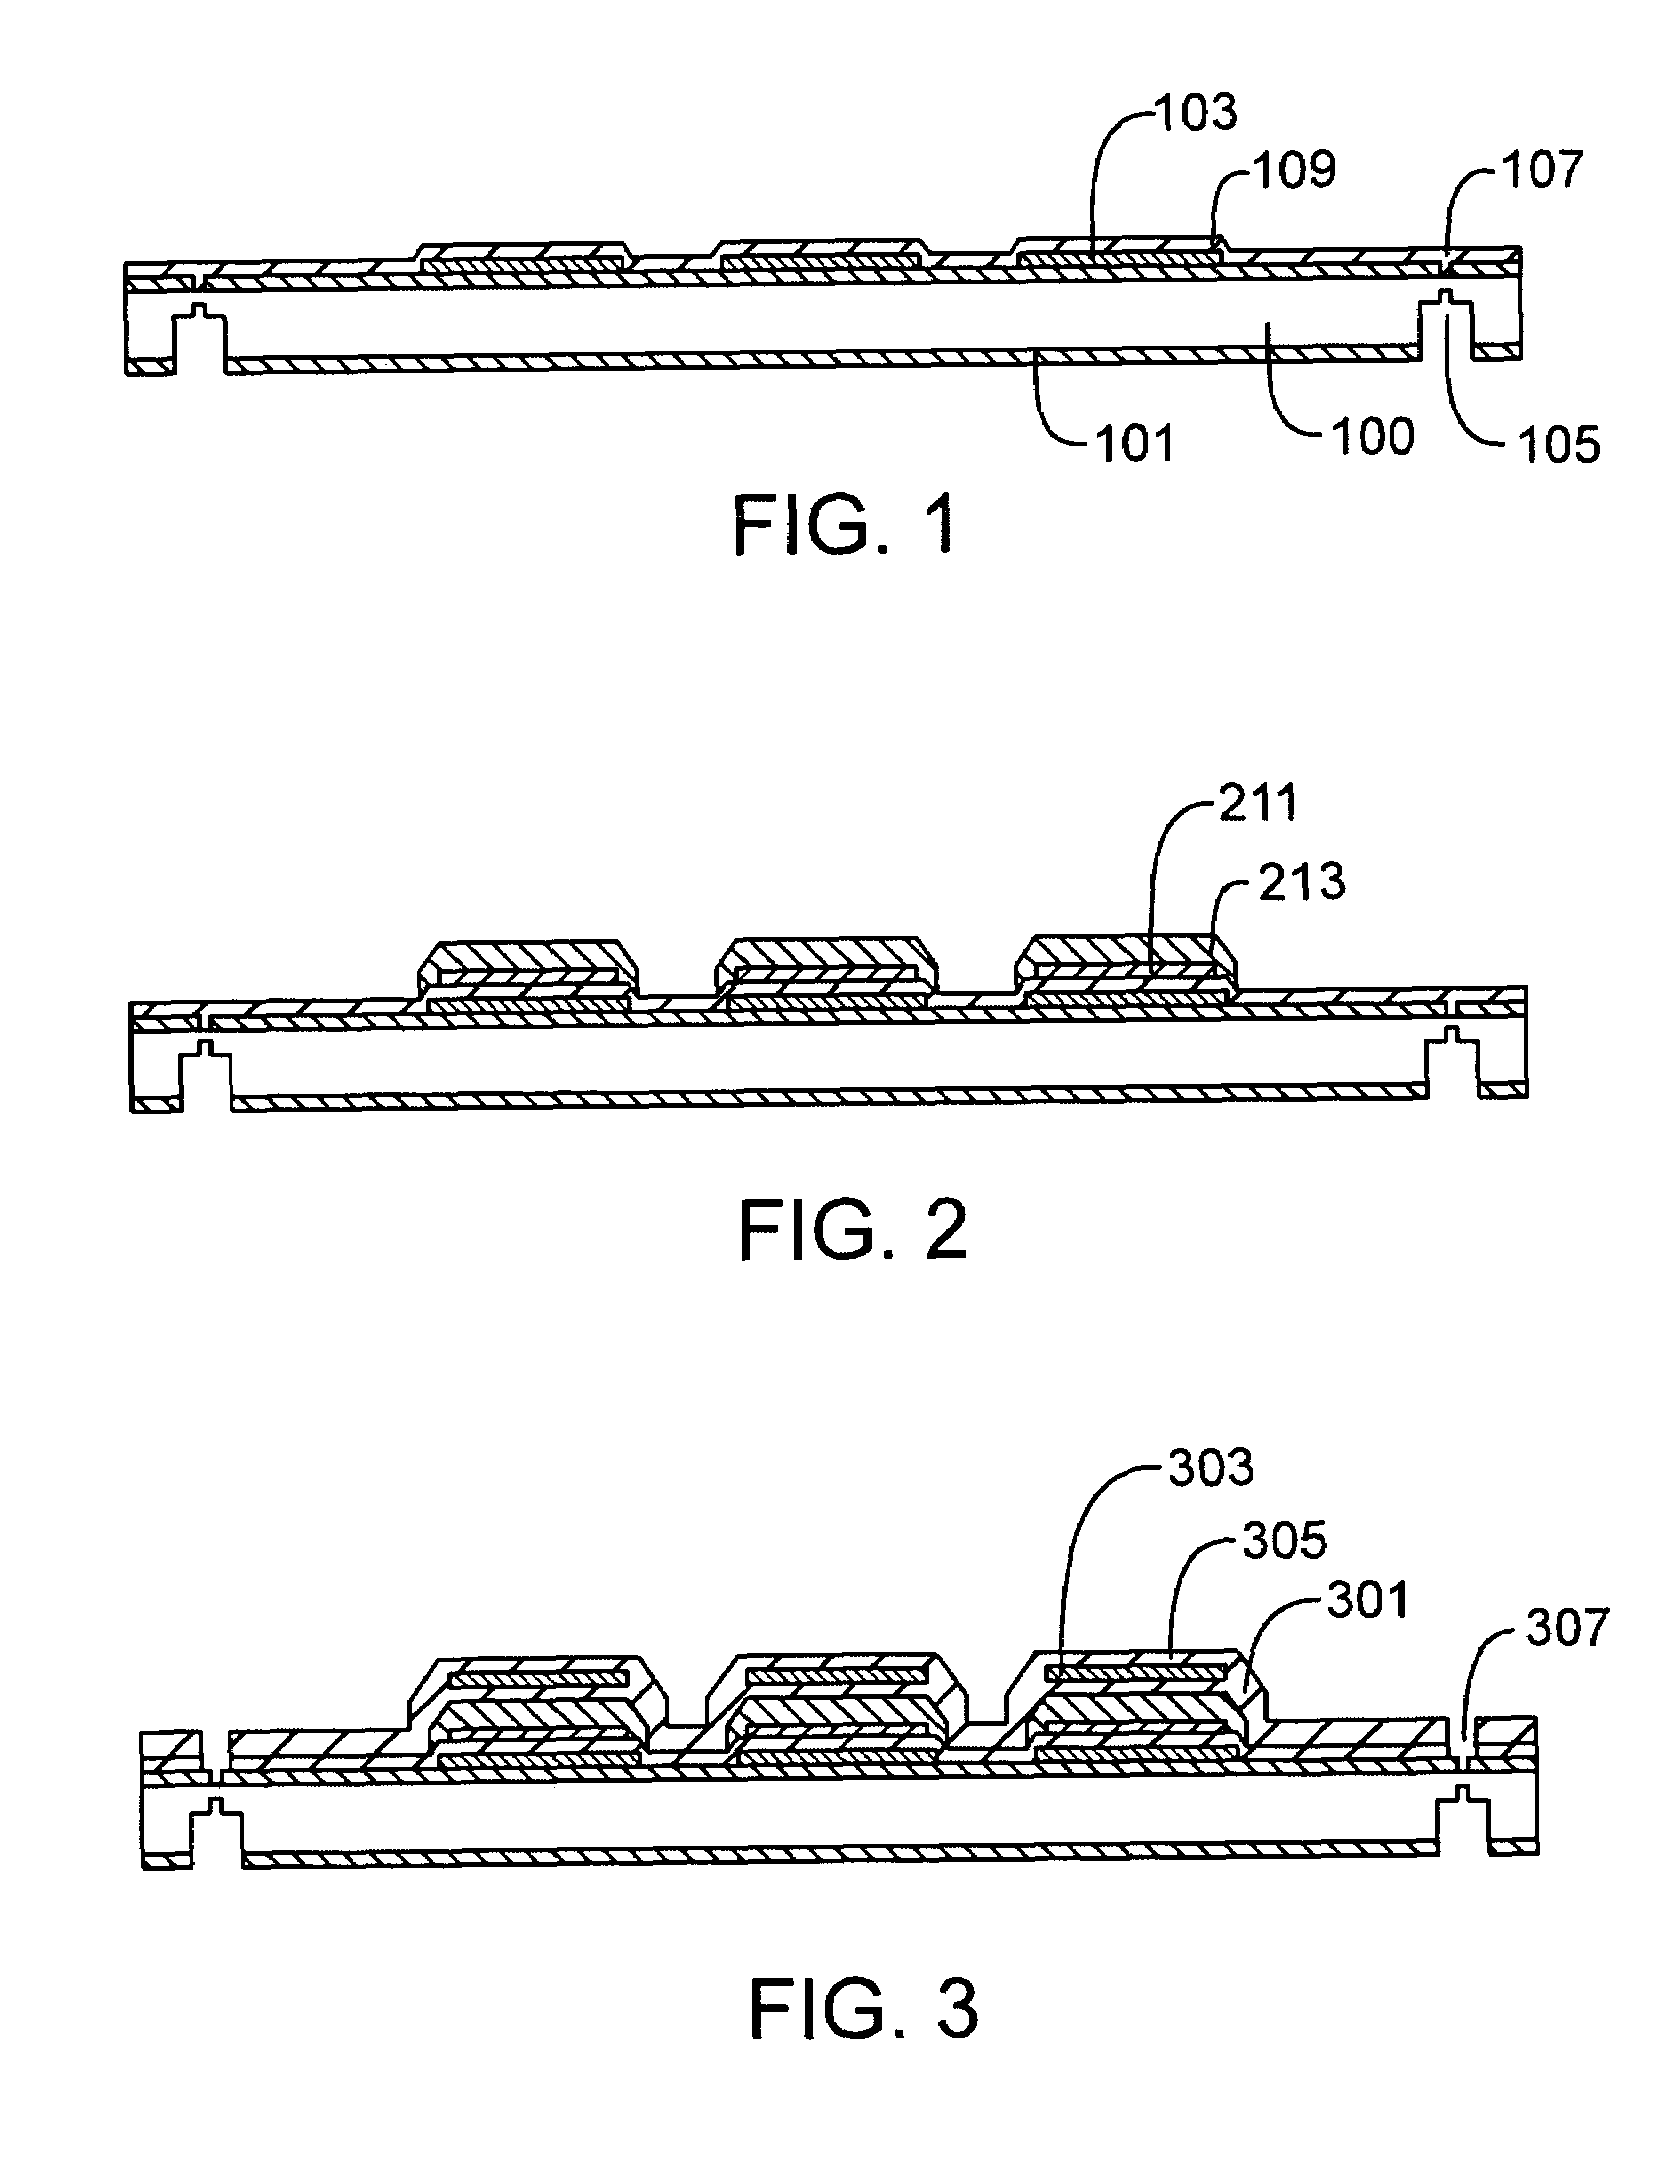 Integrated electrostatic peristaltic pump method and apparatus